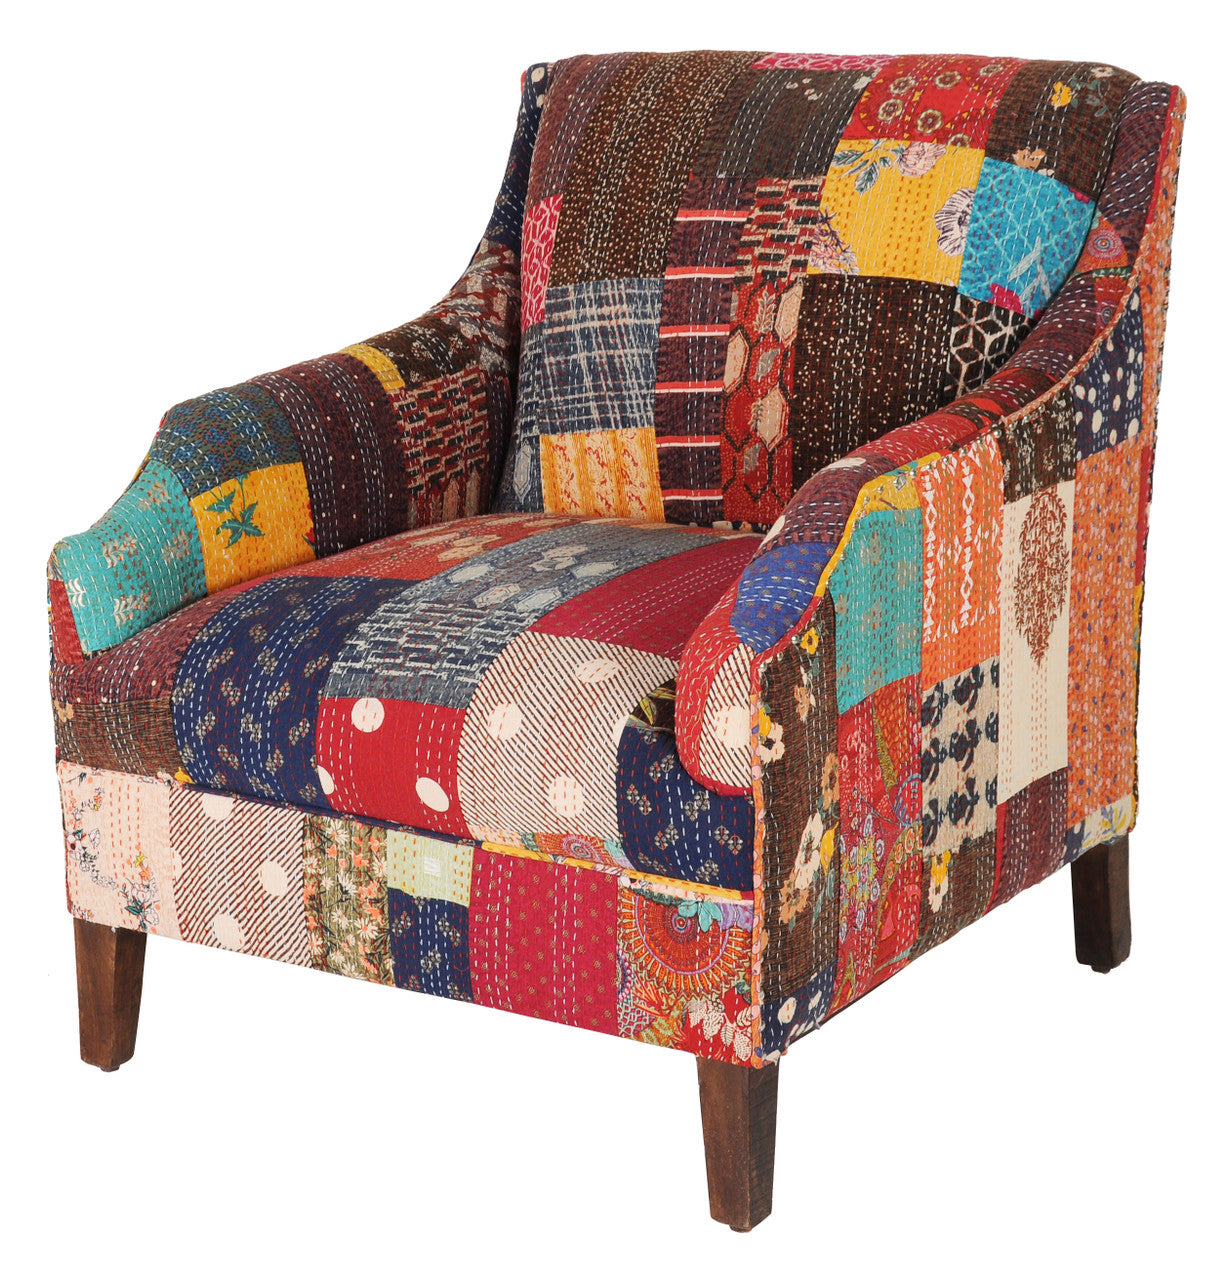 AFD Home Cadence Patchwork Chair 12020156